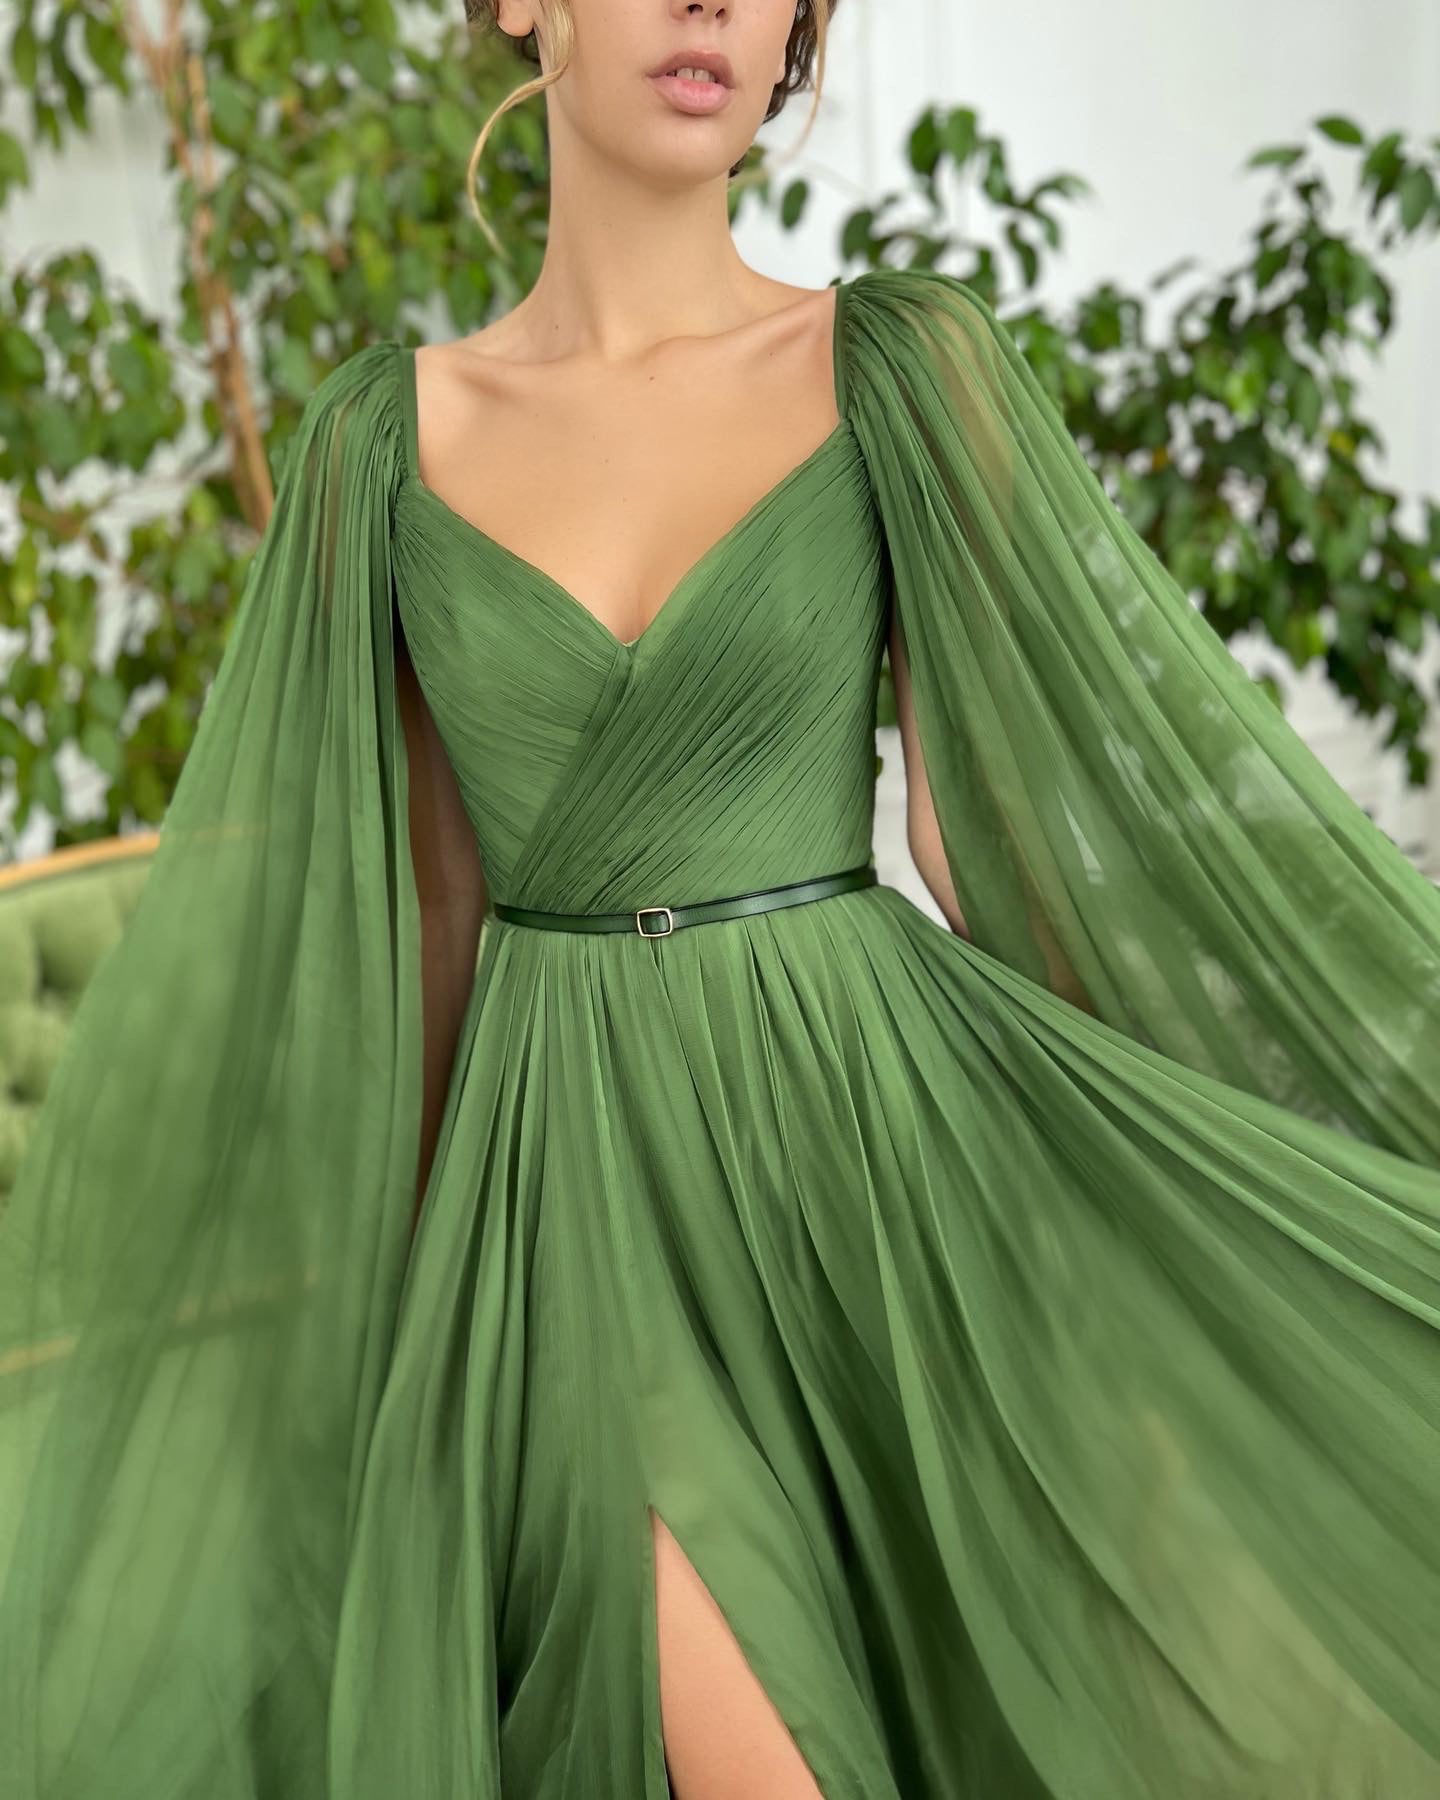 Green A-Line dress with v-neck, belt and cape sleeves 